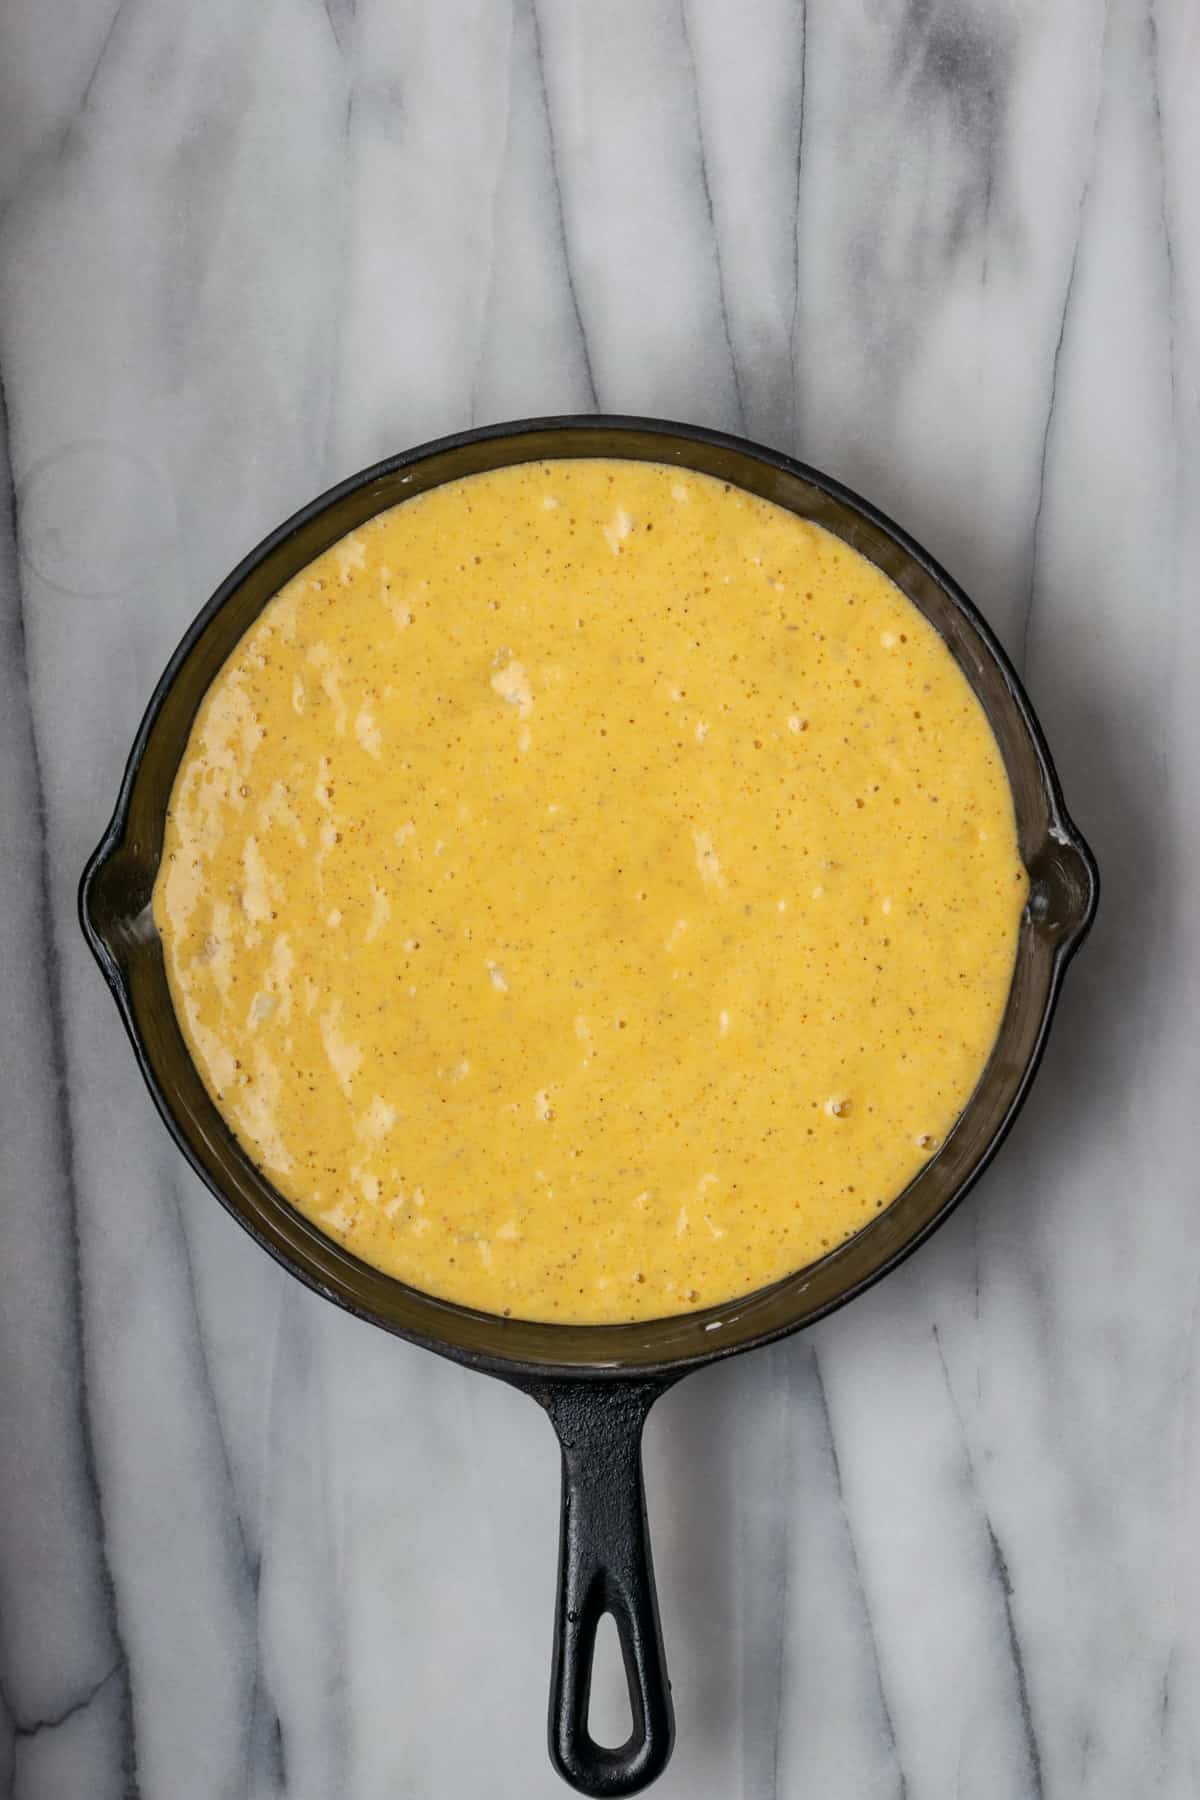 Unbaked cornbread batter in a cast iron skillet.